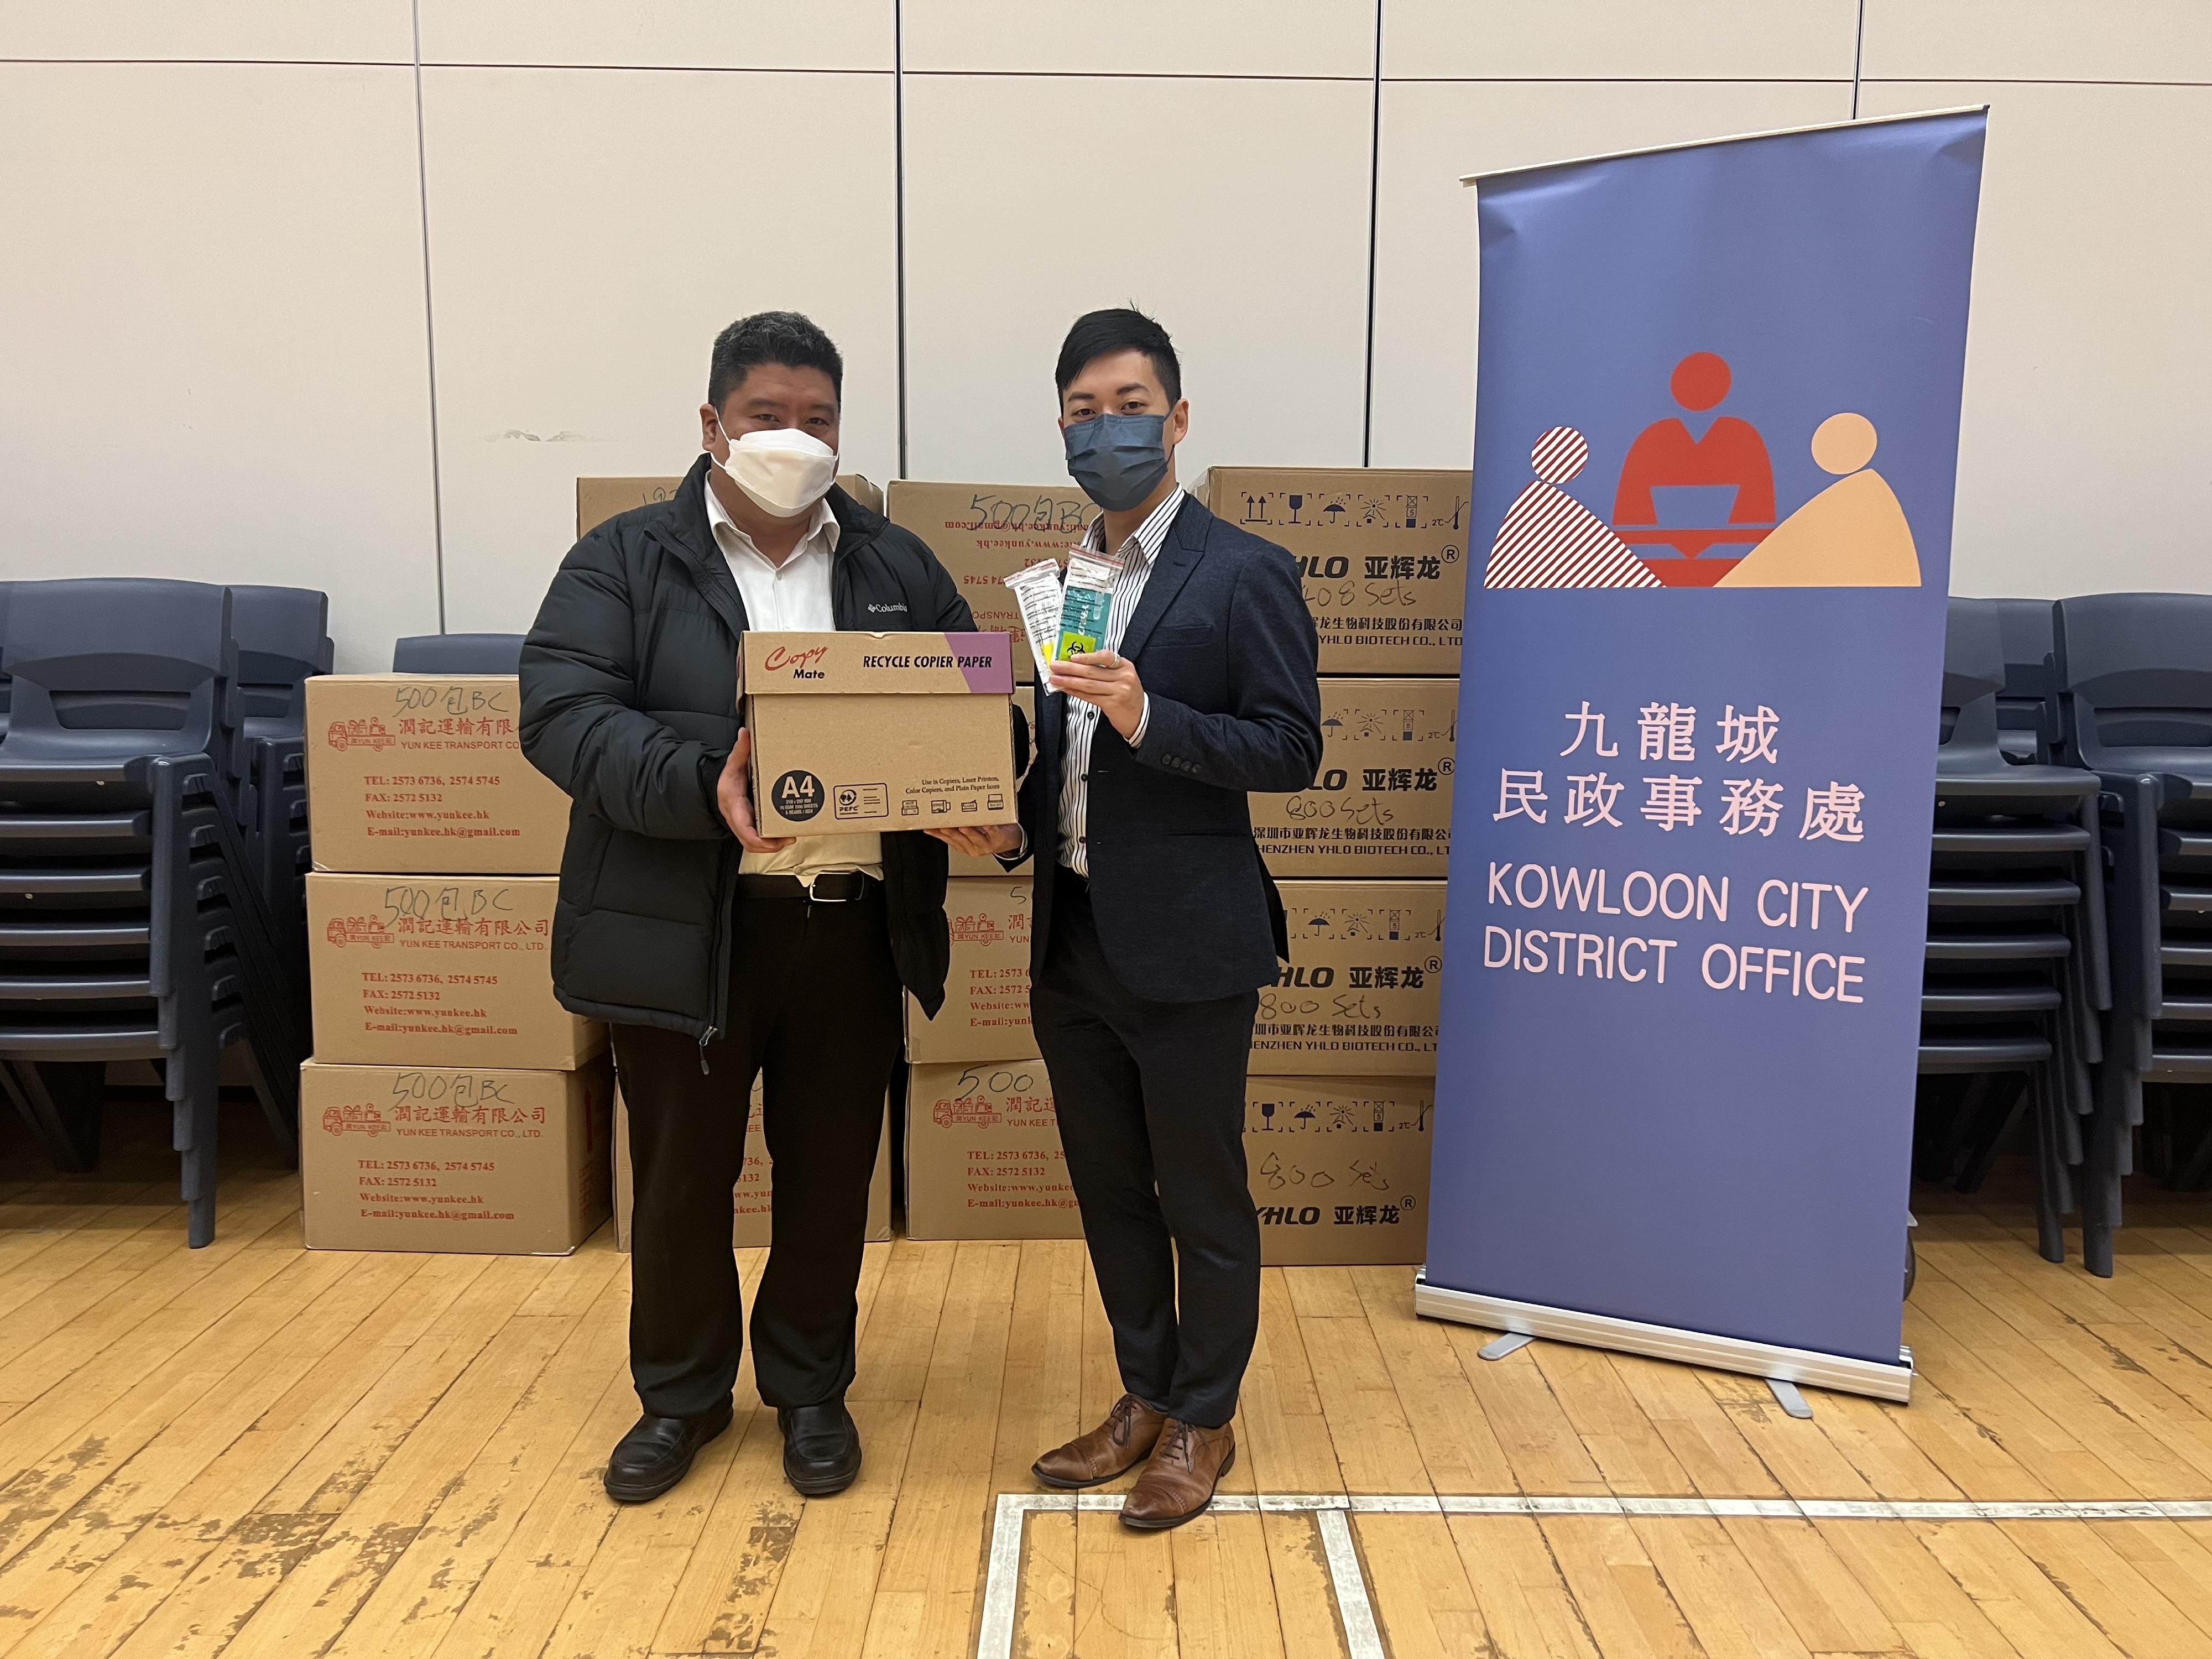 The Kowloon City District Office today (February 9) distributed COVID-19 rapid test kits to cleansing workers and property management staff working in the affected housing estates and buildings for voluntary testing through property management companies in the district.

